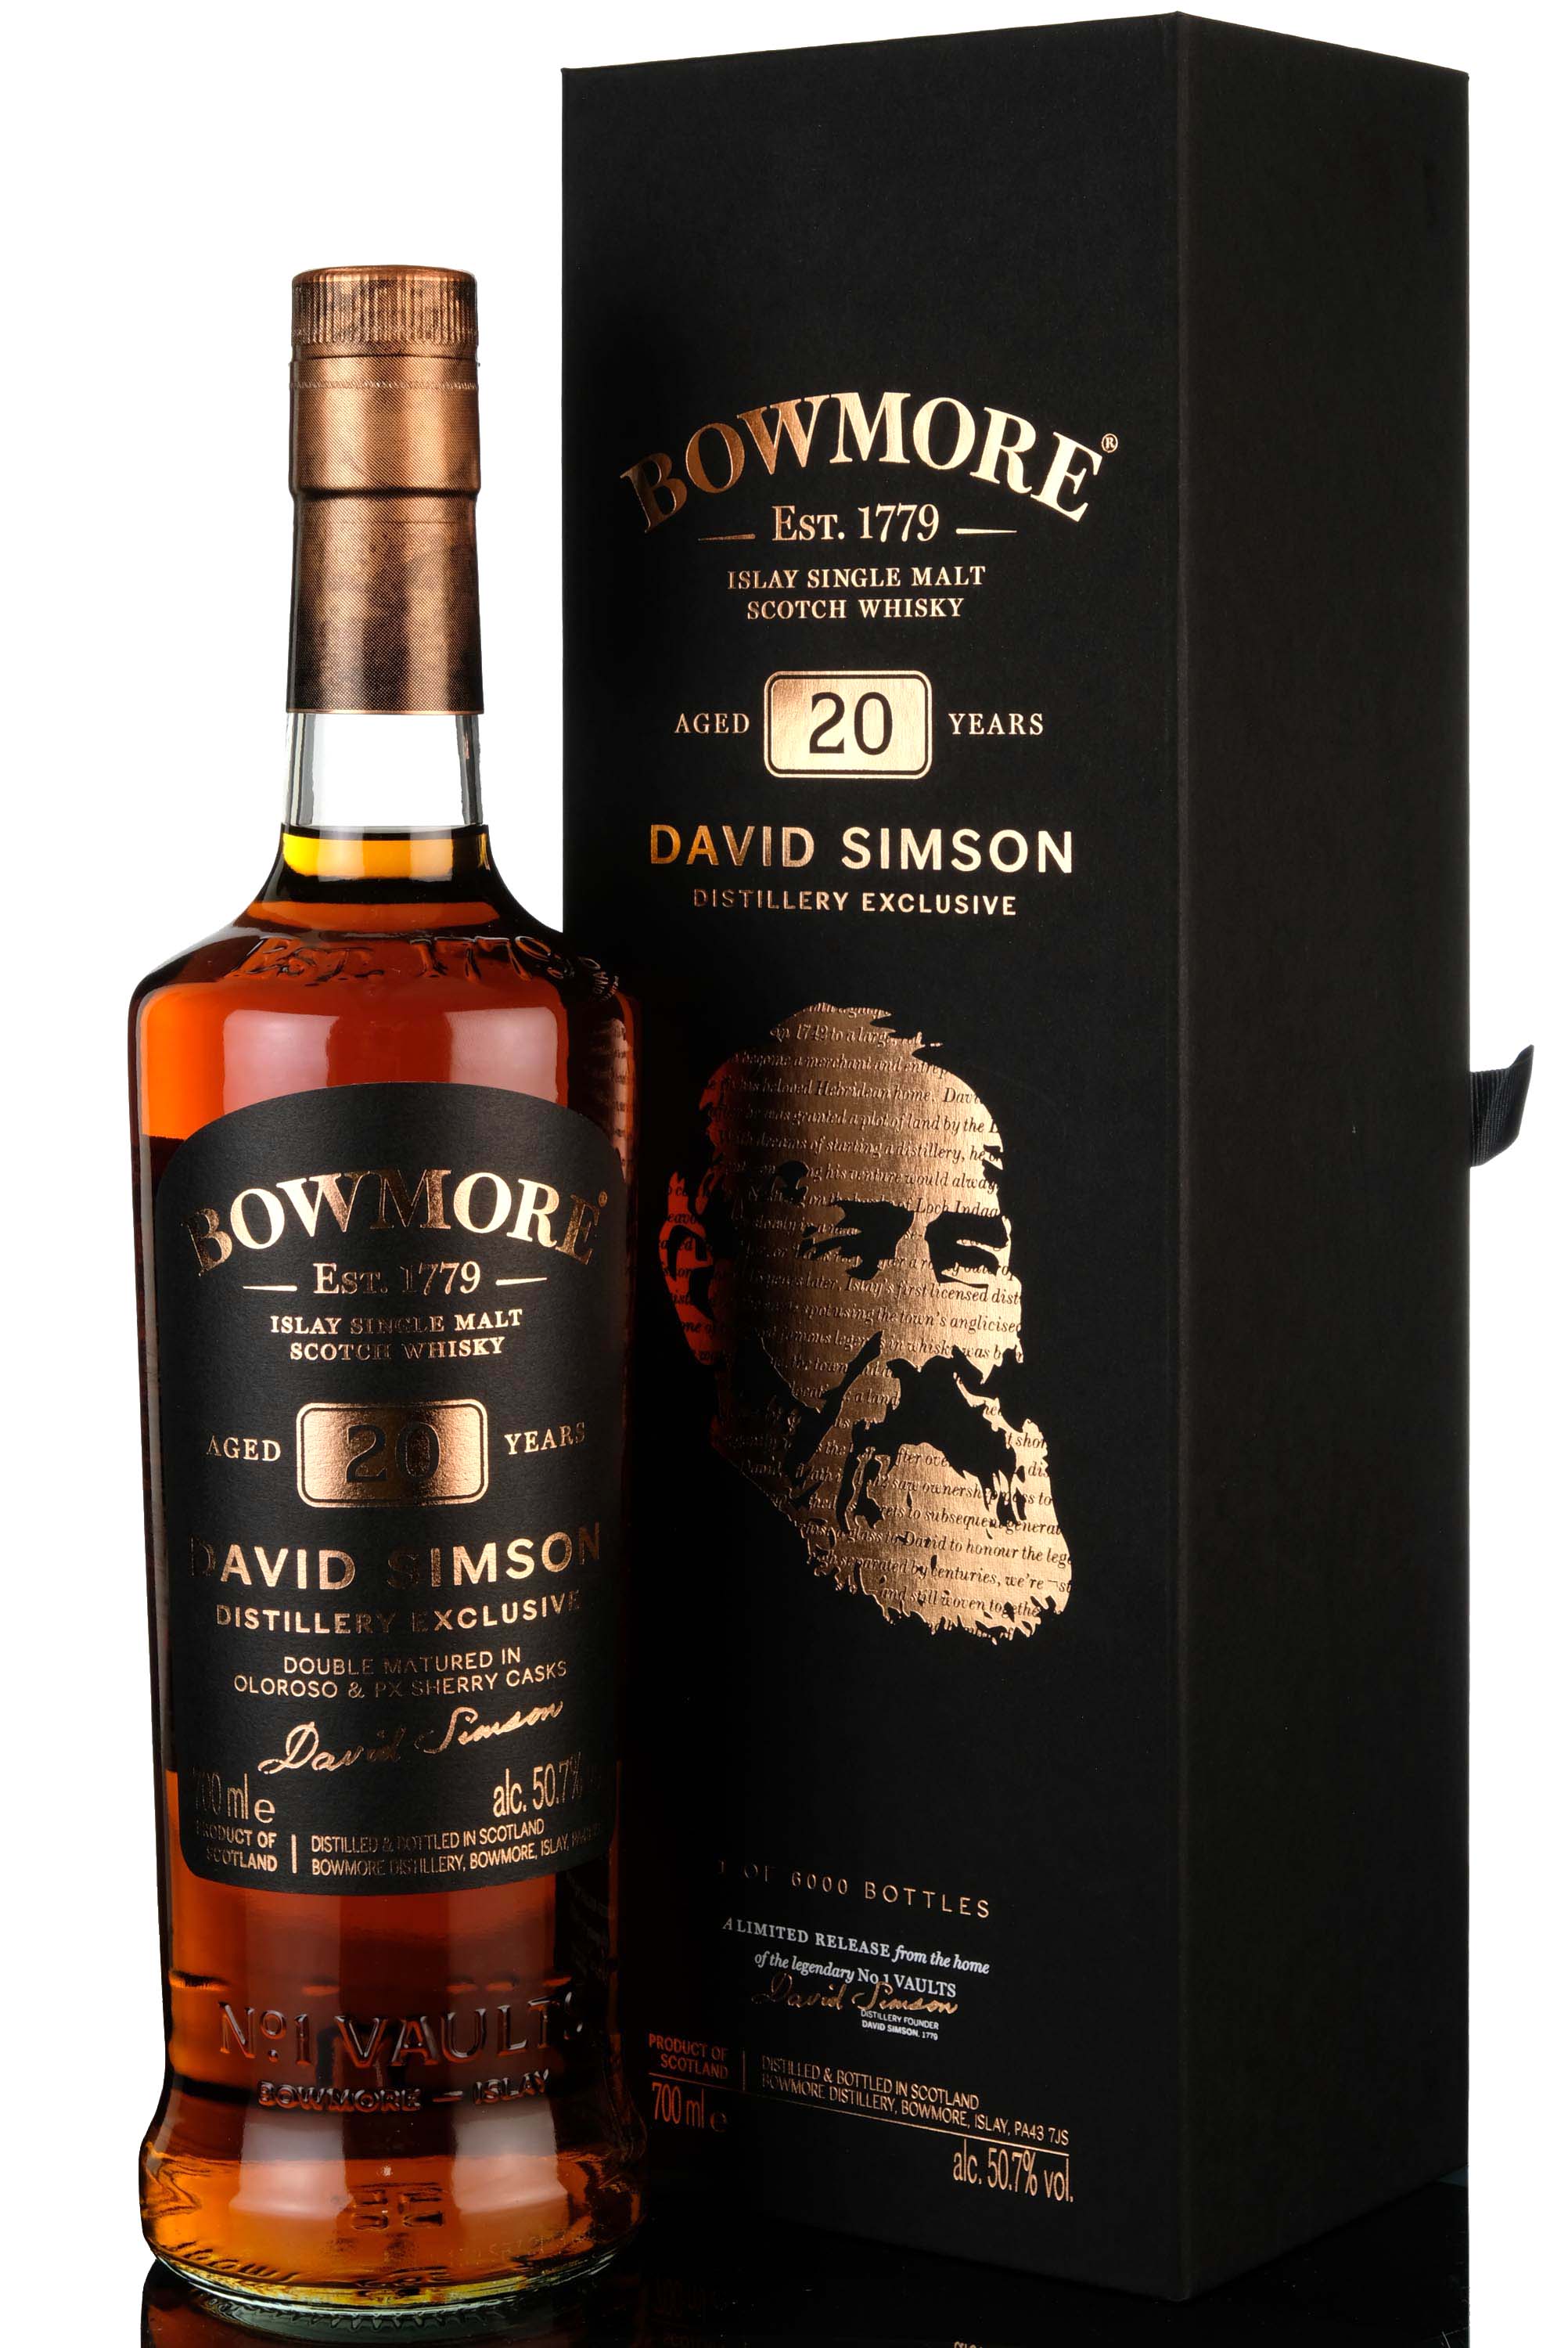 Bowmore 20 Year Old - David Simson - Distillery Exclusive